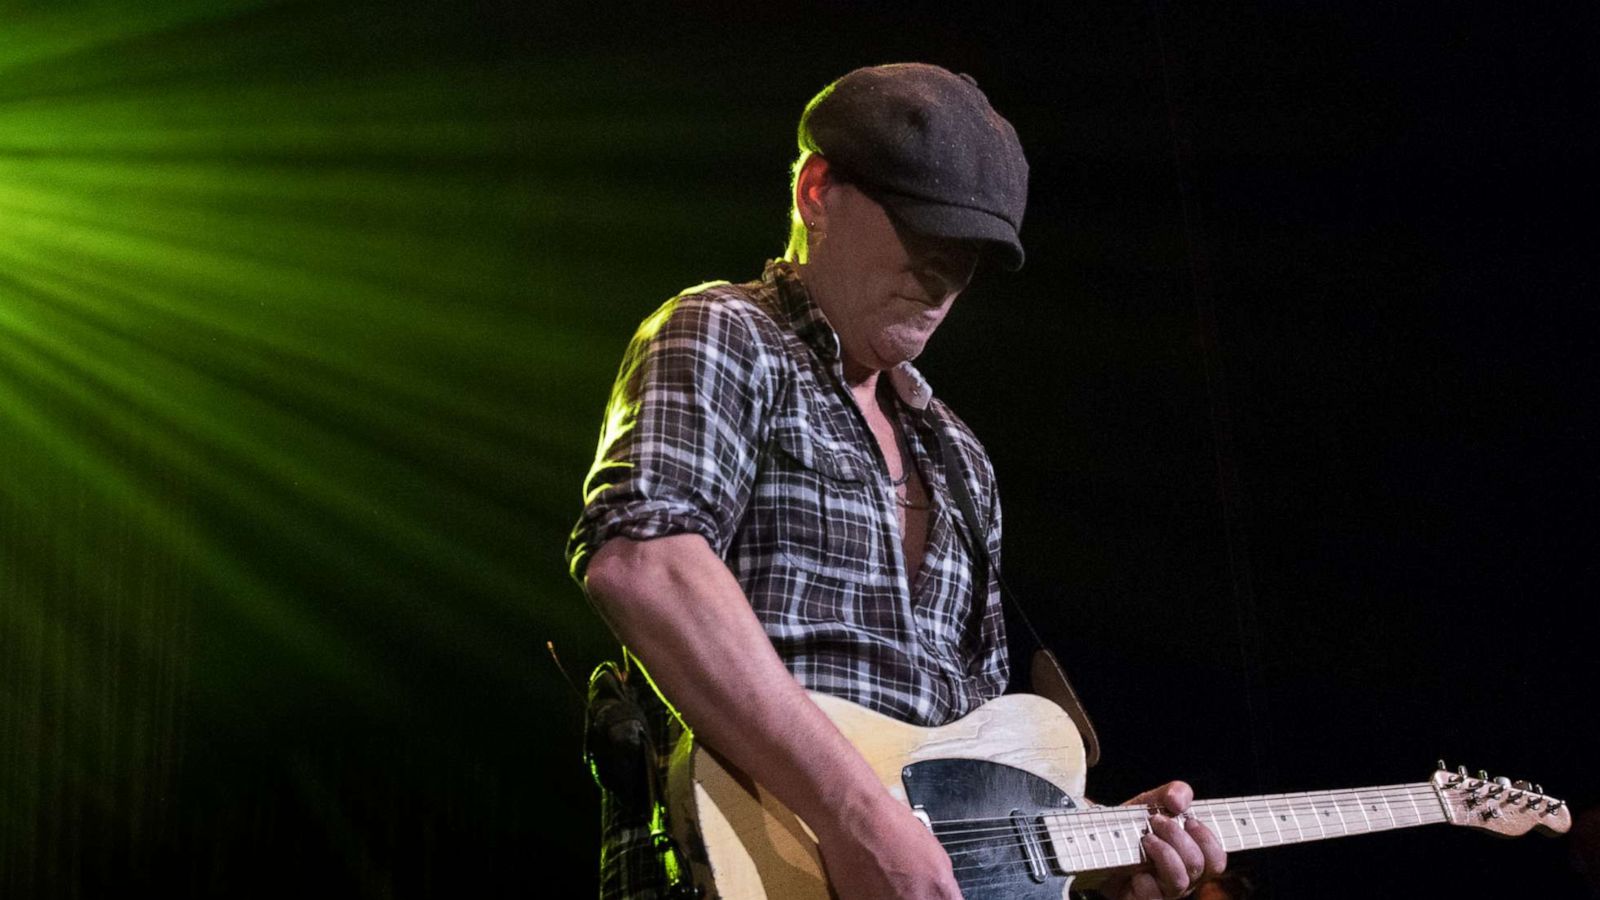 PHOTO: Bruce Springsteen at Paramount Theatre on Jan. 18, 2020 in Asbury Park, N.J.